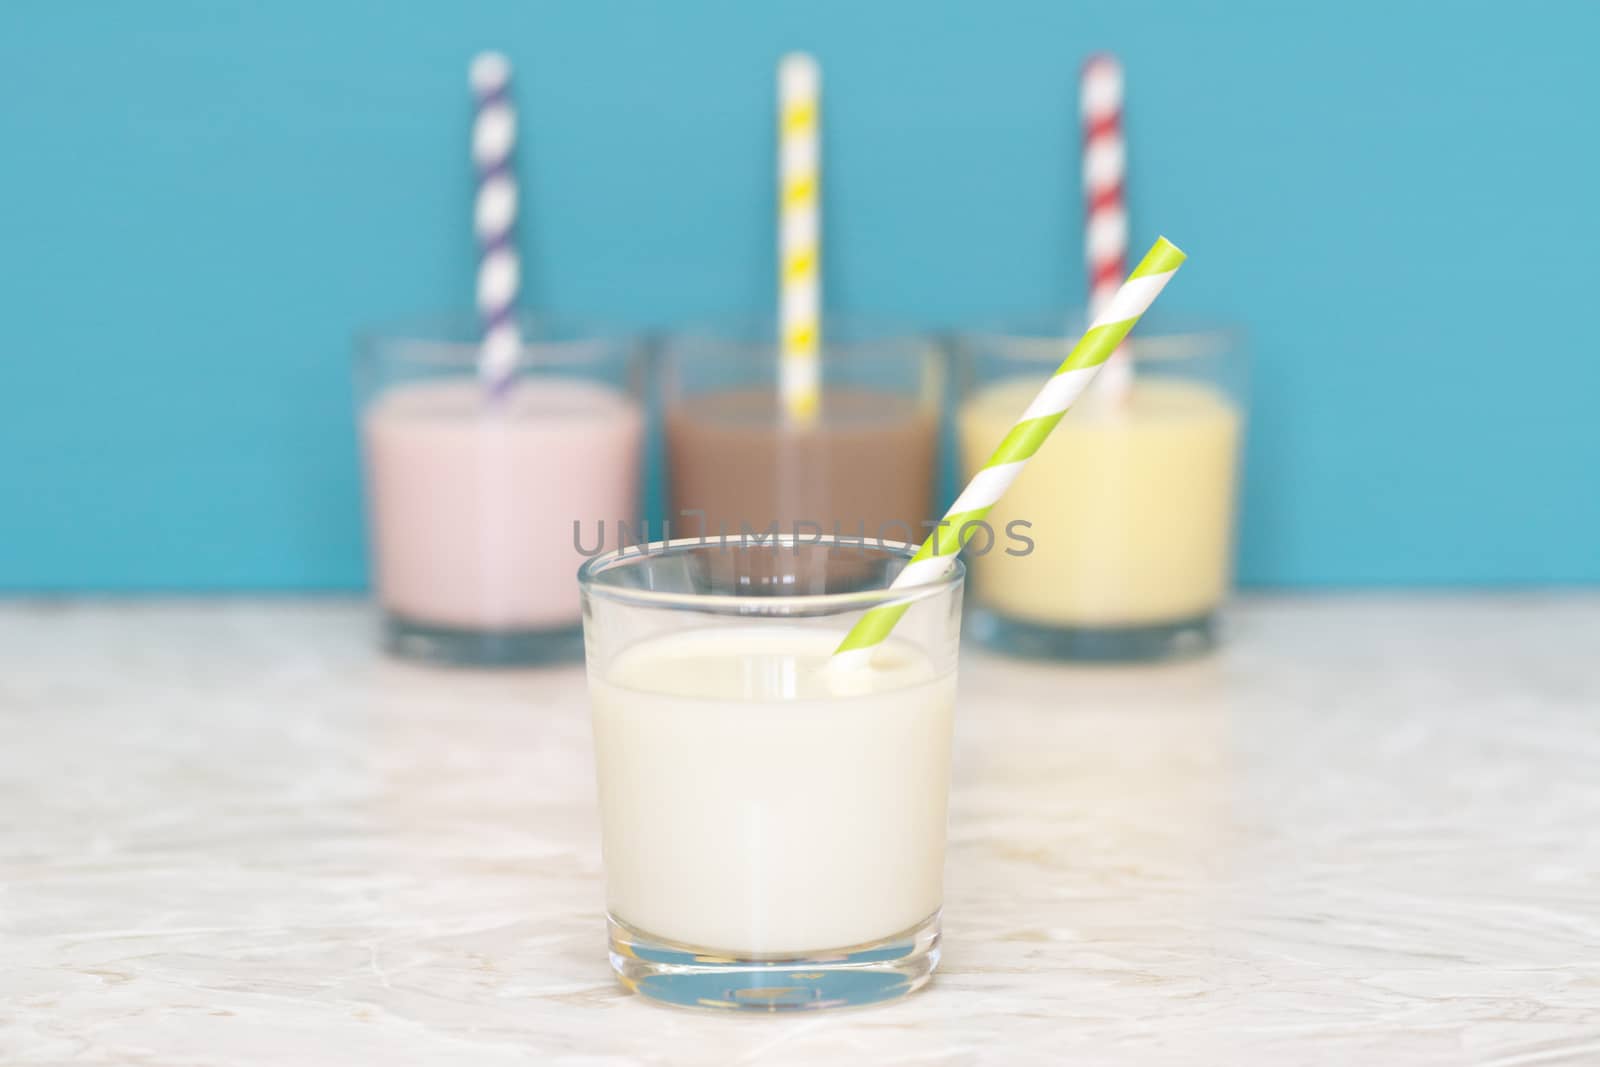 Fresh milk with a retro paper straw in front of a row of flavoured milkshakes against a teal background